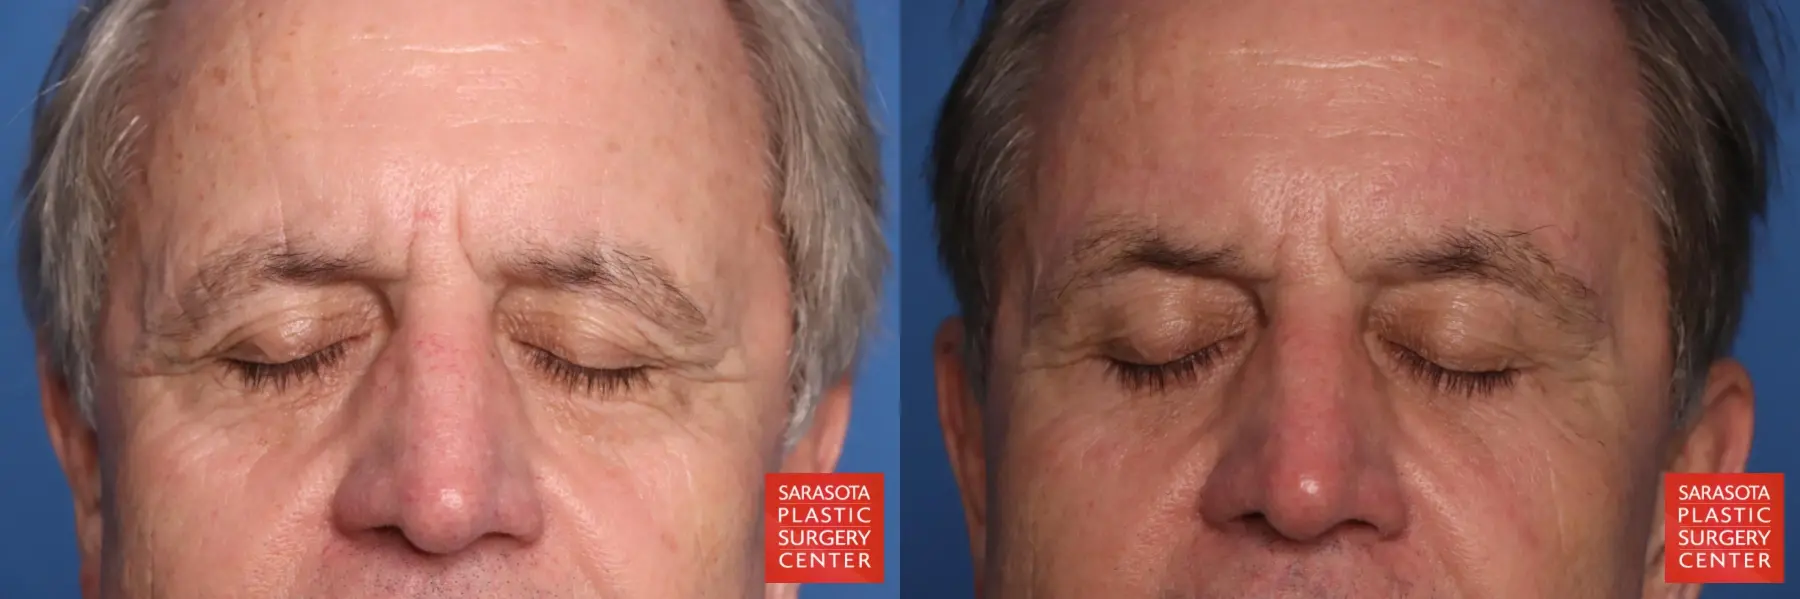 Brow Lift: Patient 10 - Before and After 2